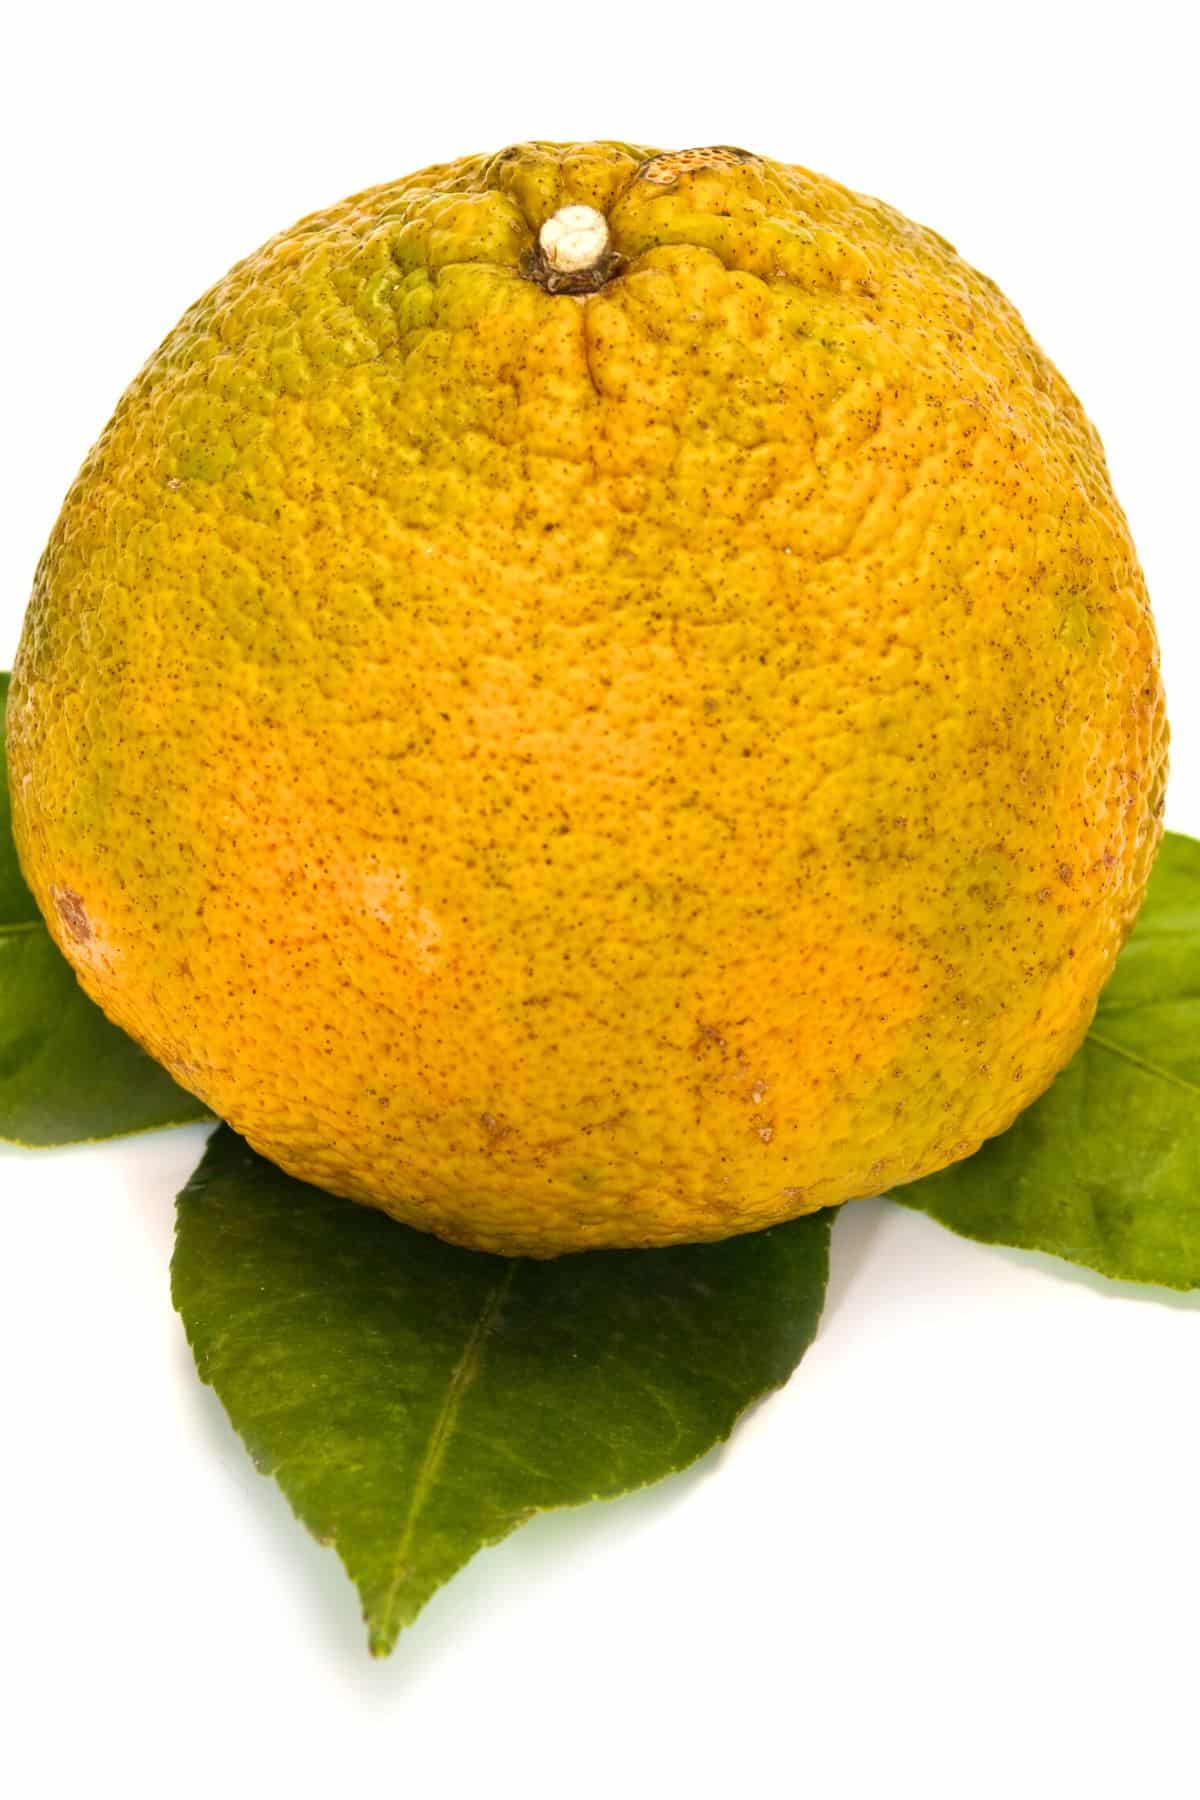 Ugli fruit, also called Jamaicaan pomelo.